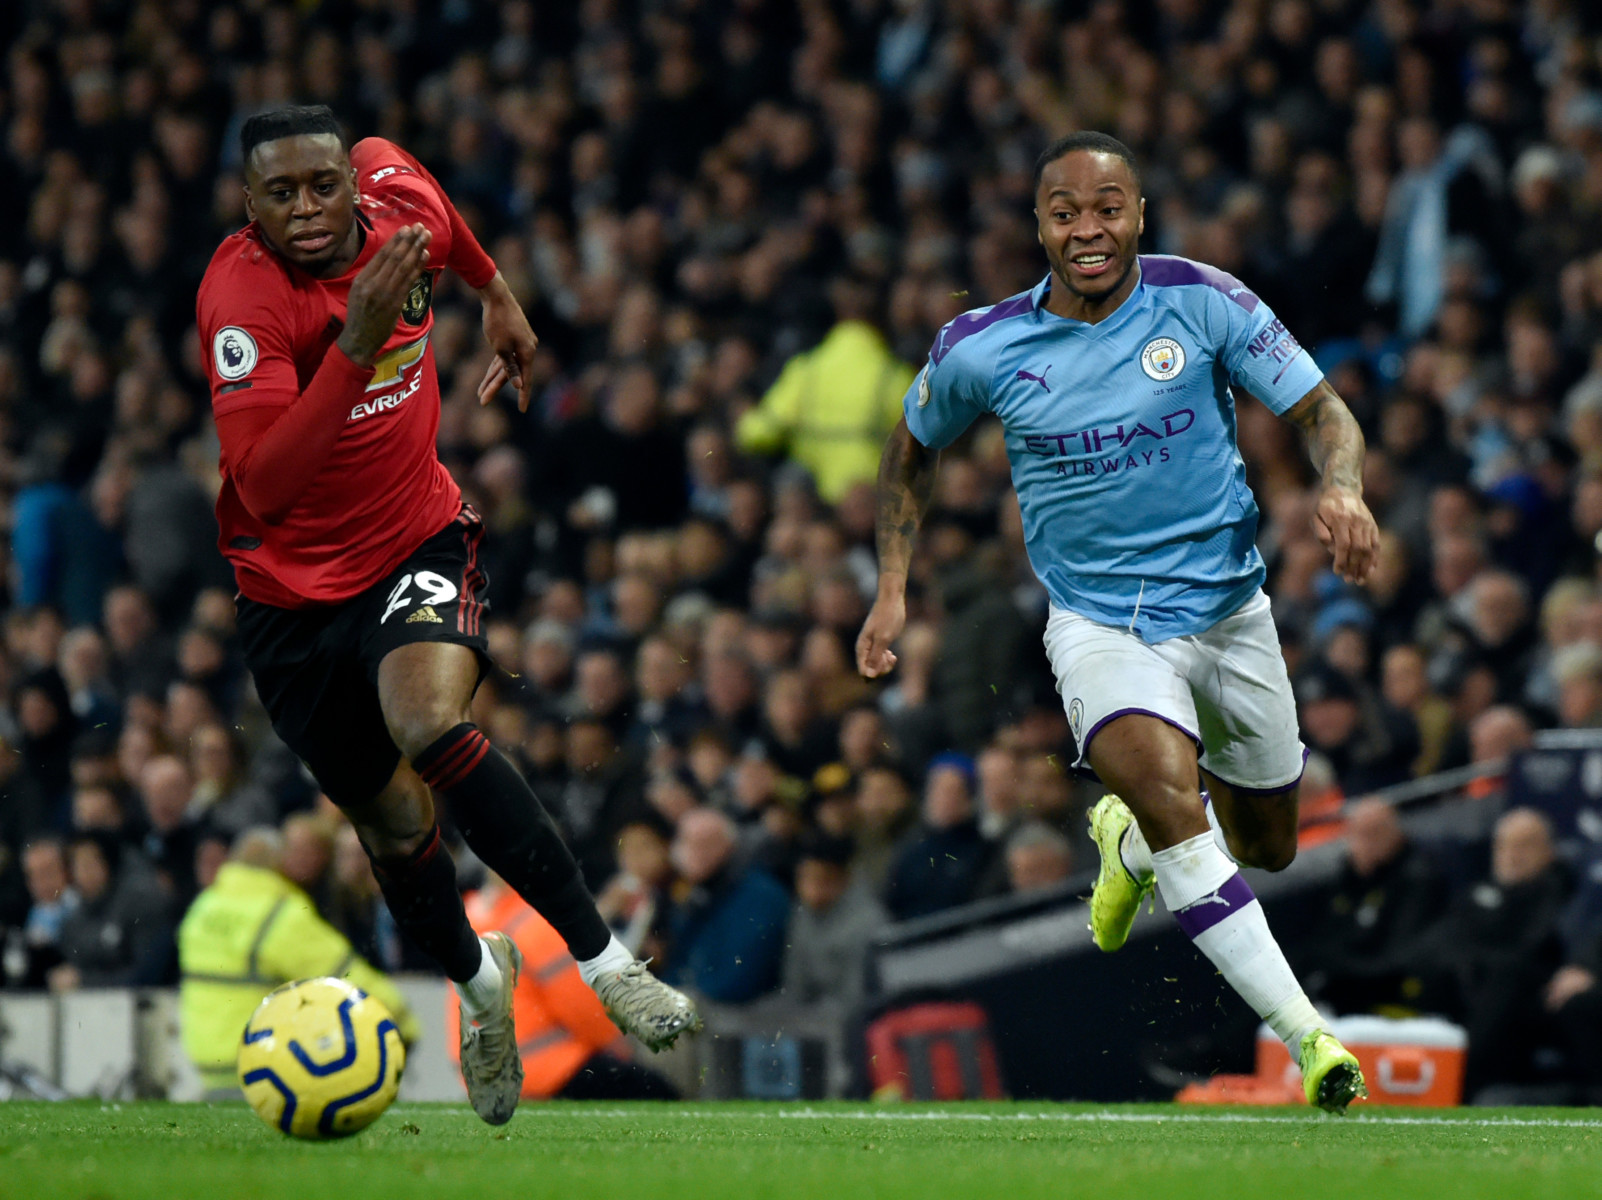 , Man Utd star Aaron Wan-Bissaka is ‘best one-on-one defender in world’ after keeping Sterling out of game, says Carragher